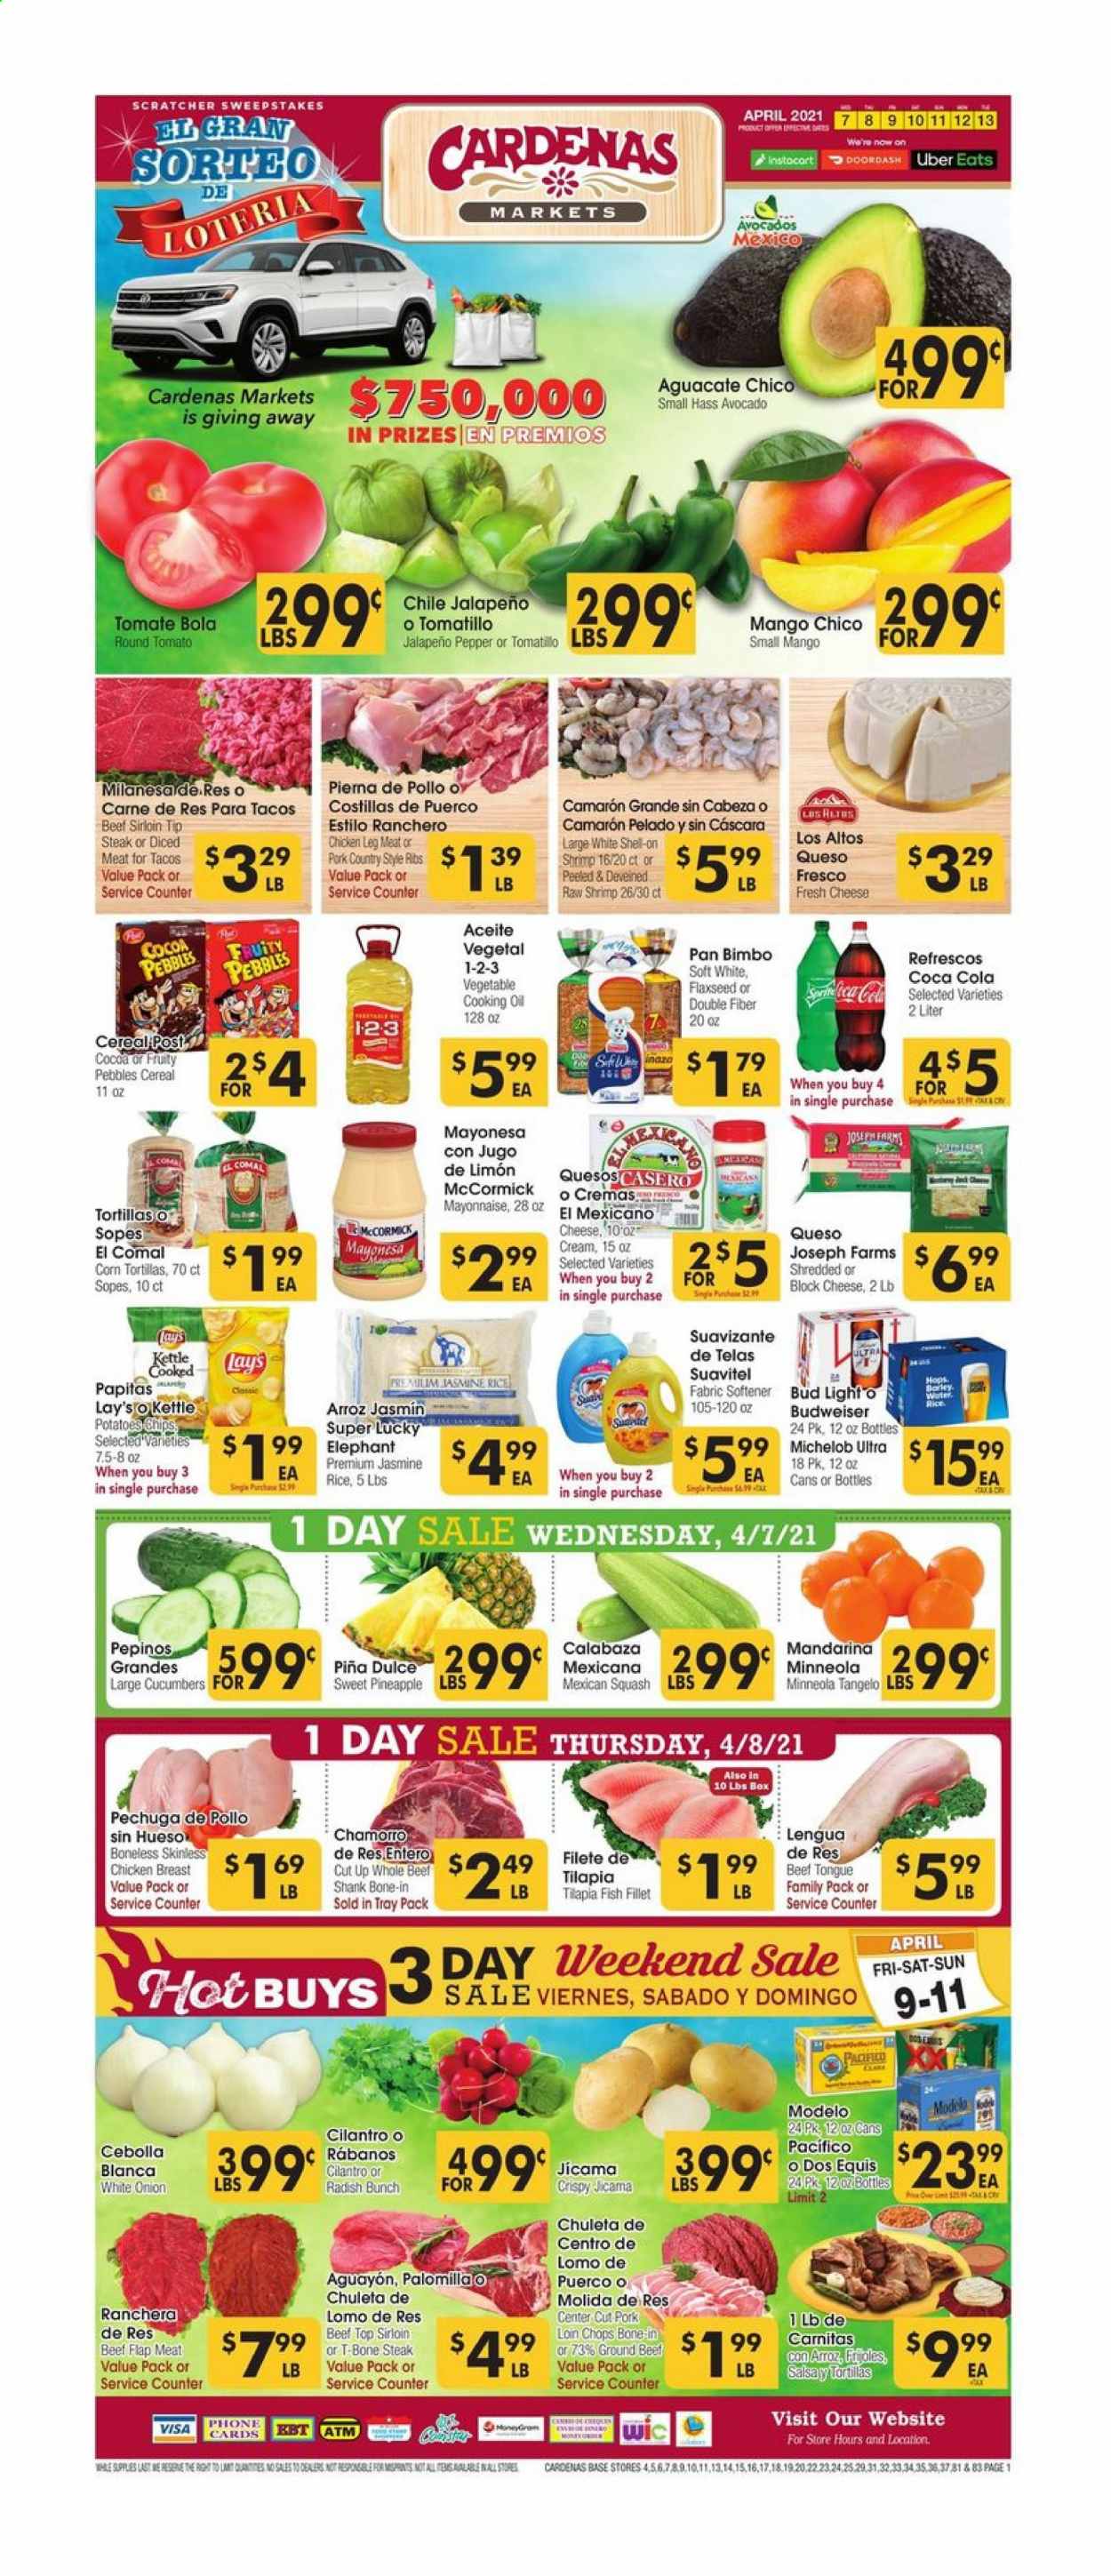 thumbnail - Cardenas Flyer - 04/07/2021 - 04/13/2021 - Sales products - corn tortillas, tortillas, cucumber, tomatillo, jicama, jalapeño, avocado, mango, fish fillets, tilapia, fish, shrimps, cheese, mayonnaise, chips, Lay’s, cocoa, cereals, Fruity Pebbles, jasmine rice, cilantro, oil, Coca-Cola, beer, Budweiser, Dos Equis, Michelob, Modelo, chicken breasts, chicken legs, beef meat, beef shank, beef sirloin, ground beef, t-bone steak, steak, pork loin, pork meat, pork ribs, country style ribs, fabric softener, tray, pan, radishes, pineapple, onion. Page 1.